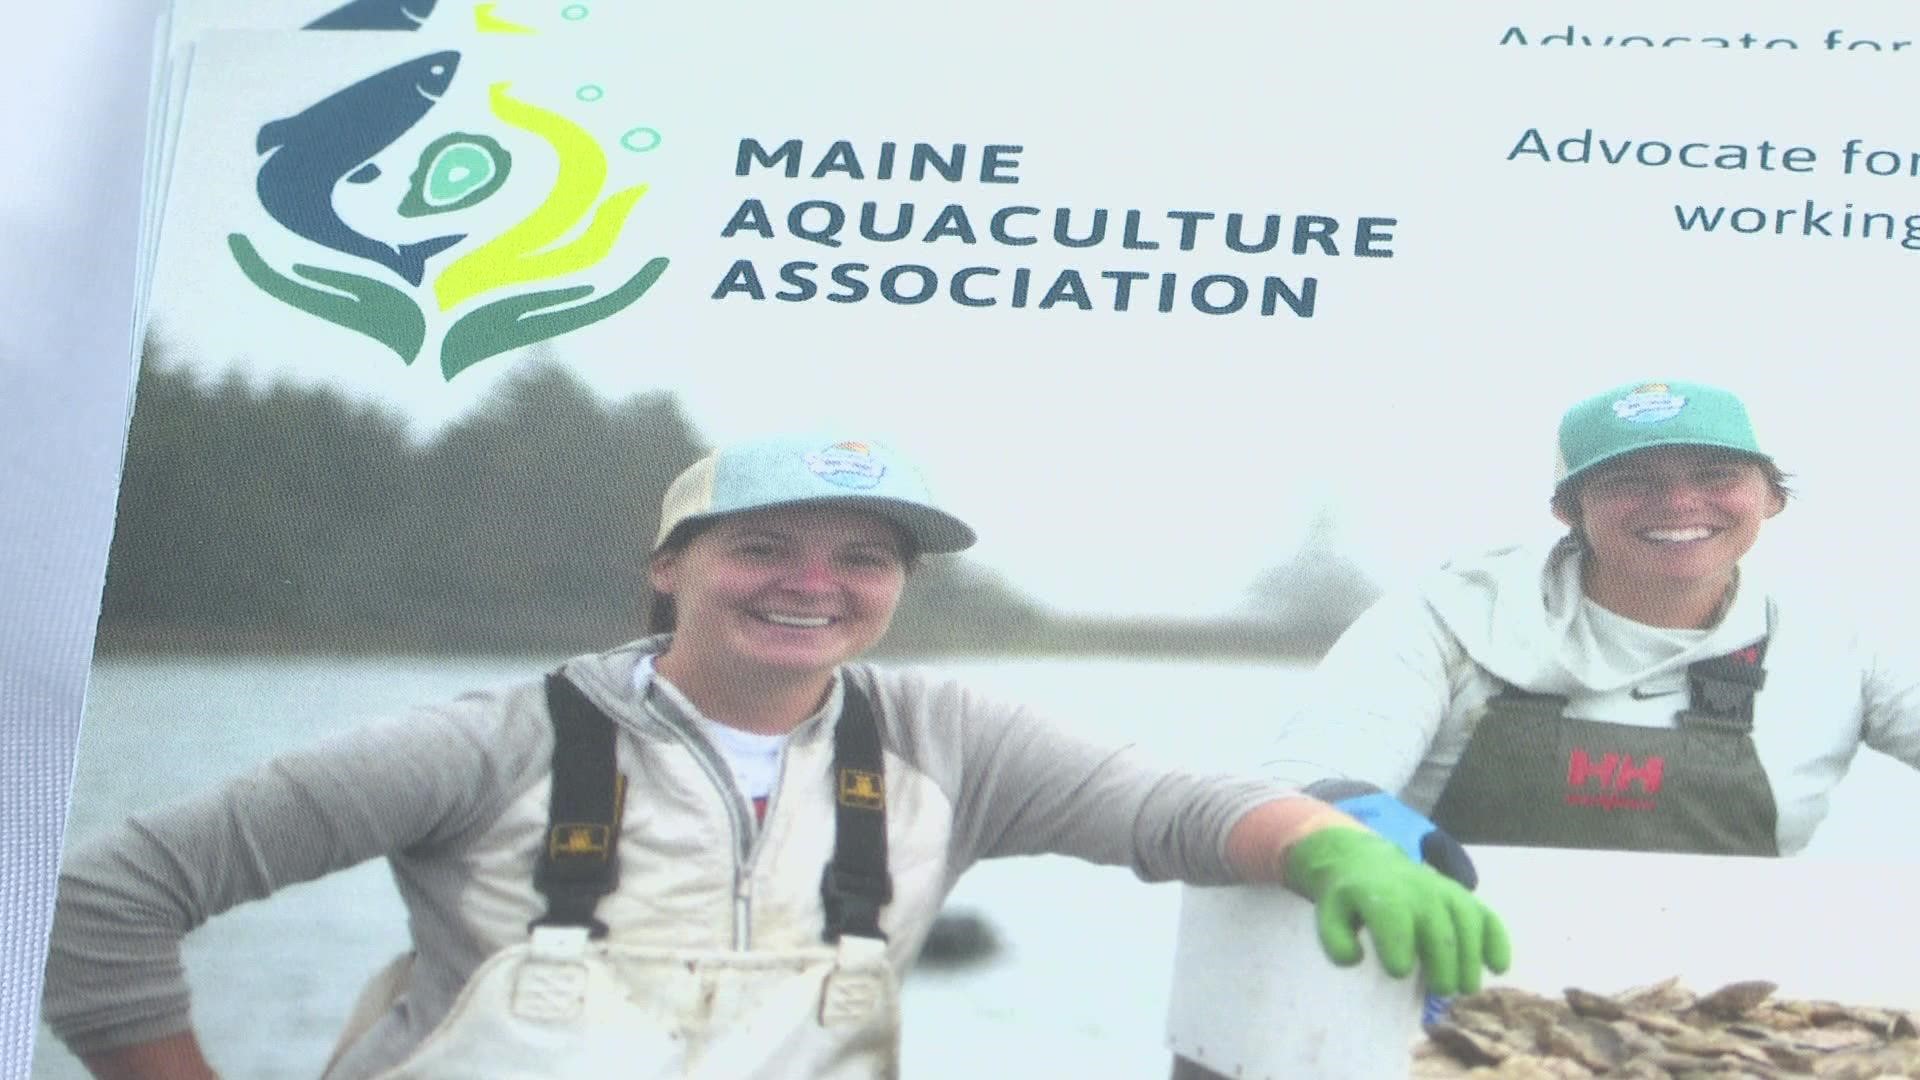 Industry leaders from around the nation gathered in Portland for the Northeast Aquaculture Conference and Exposition.